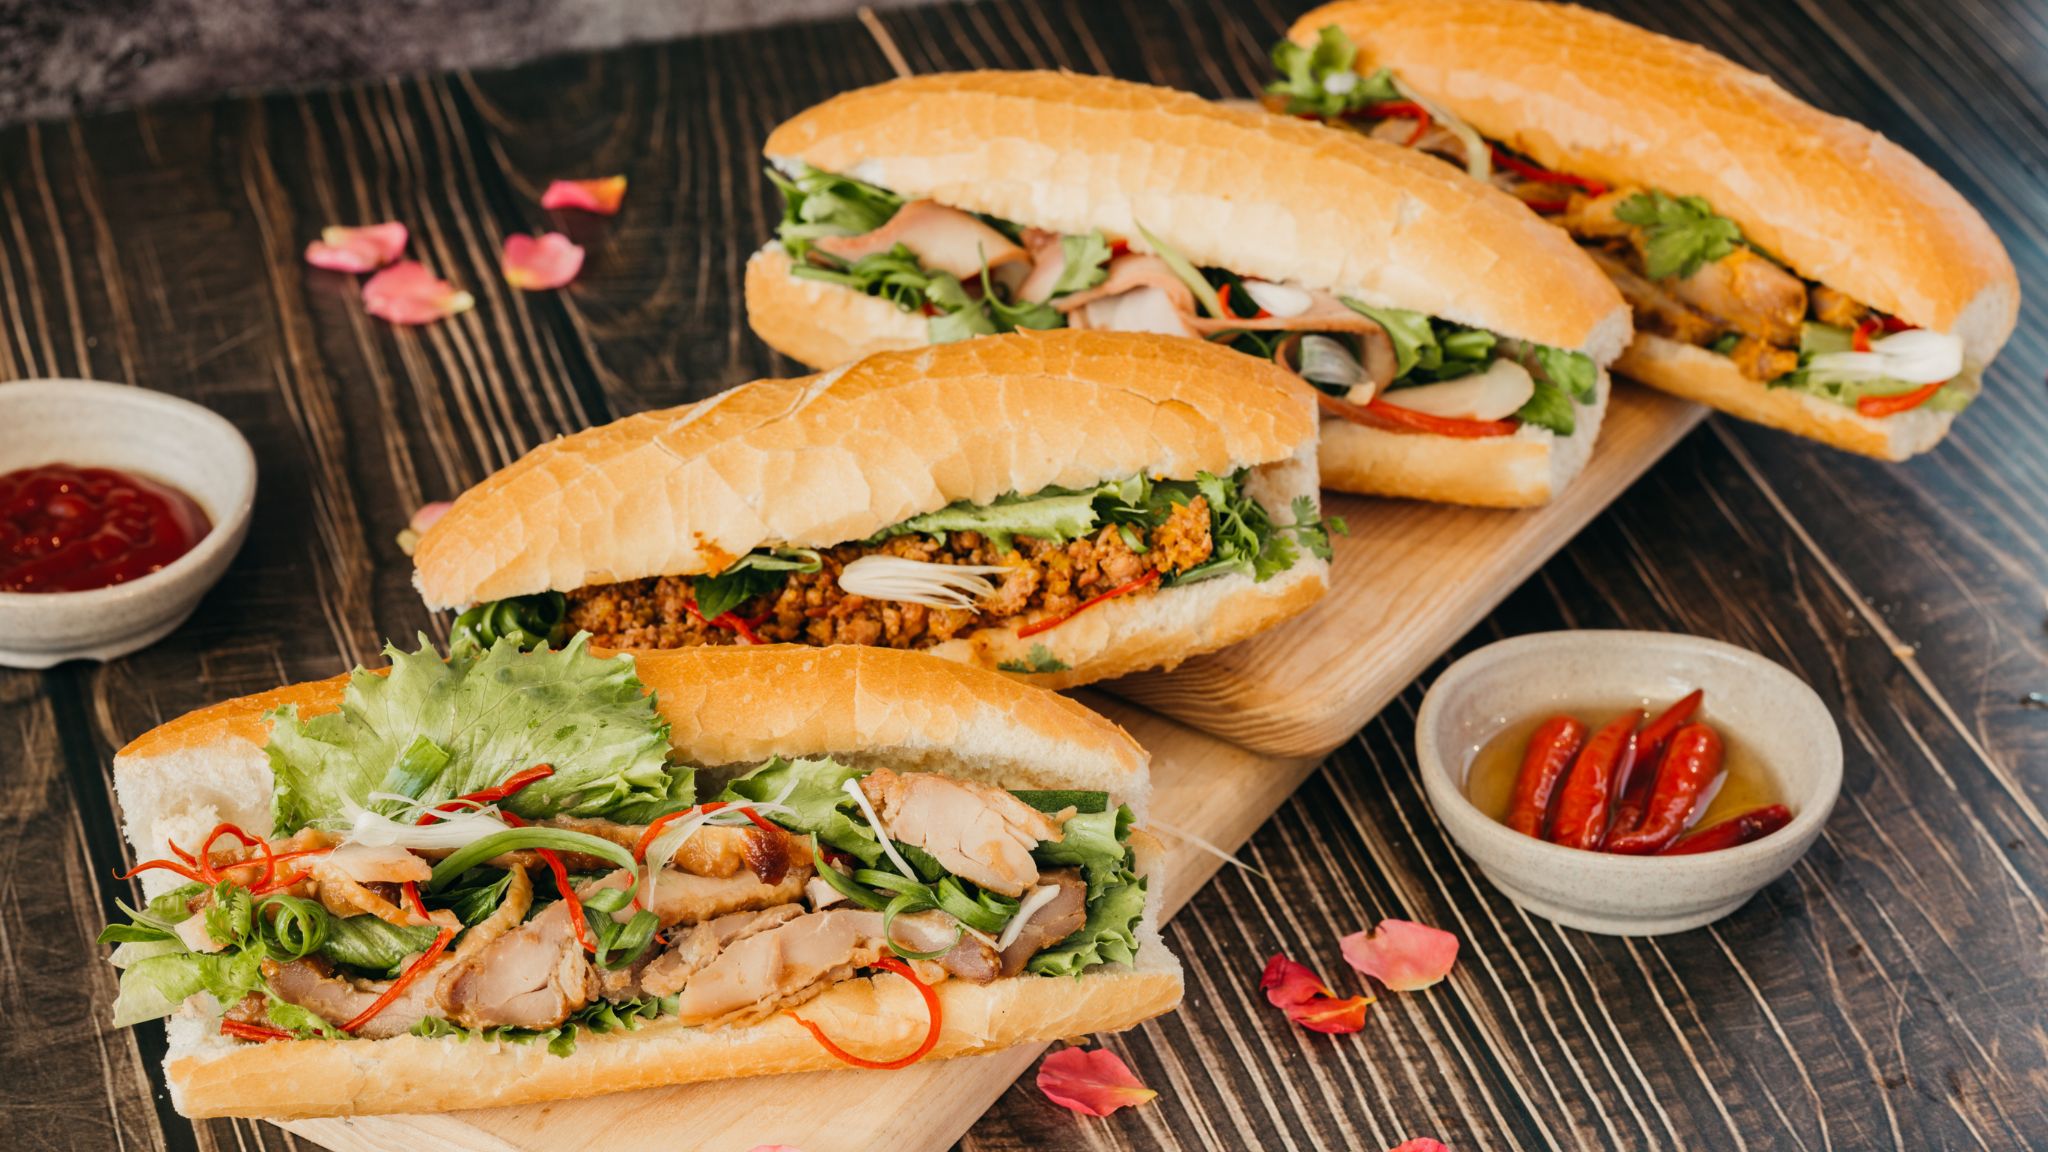 Day 5 Try The Worldwide Famous Banh Mi